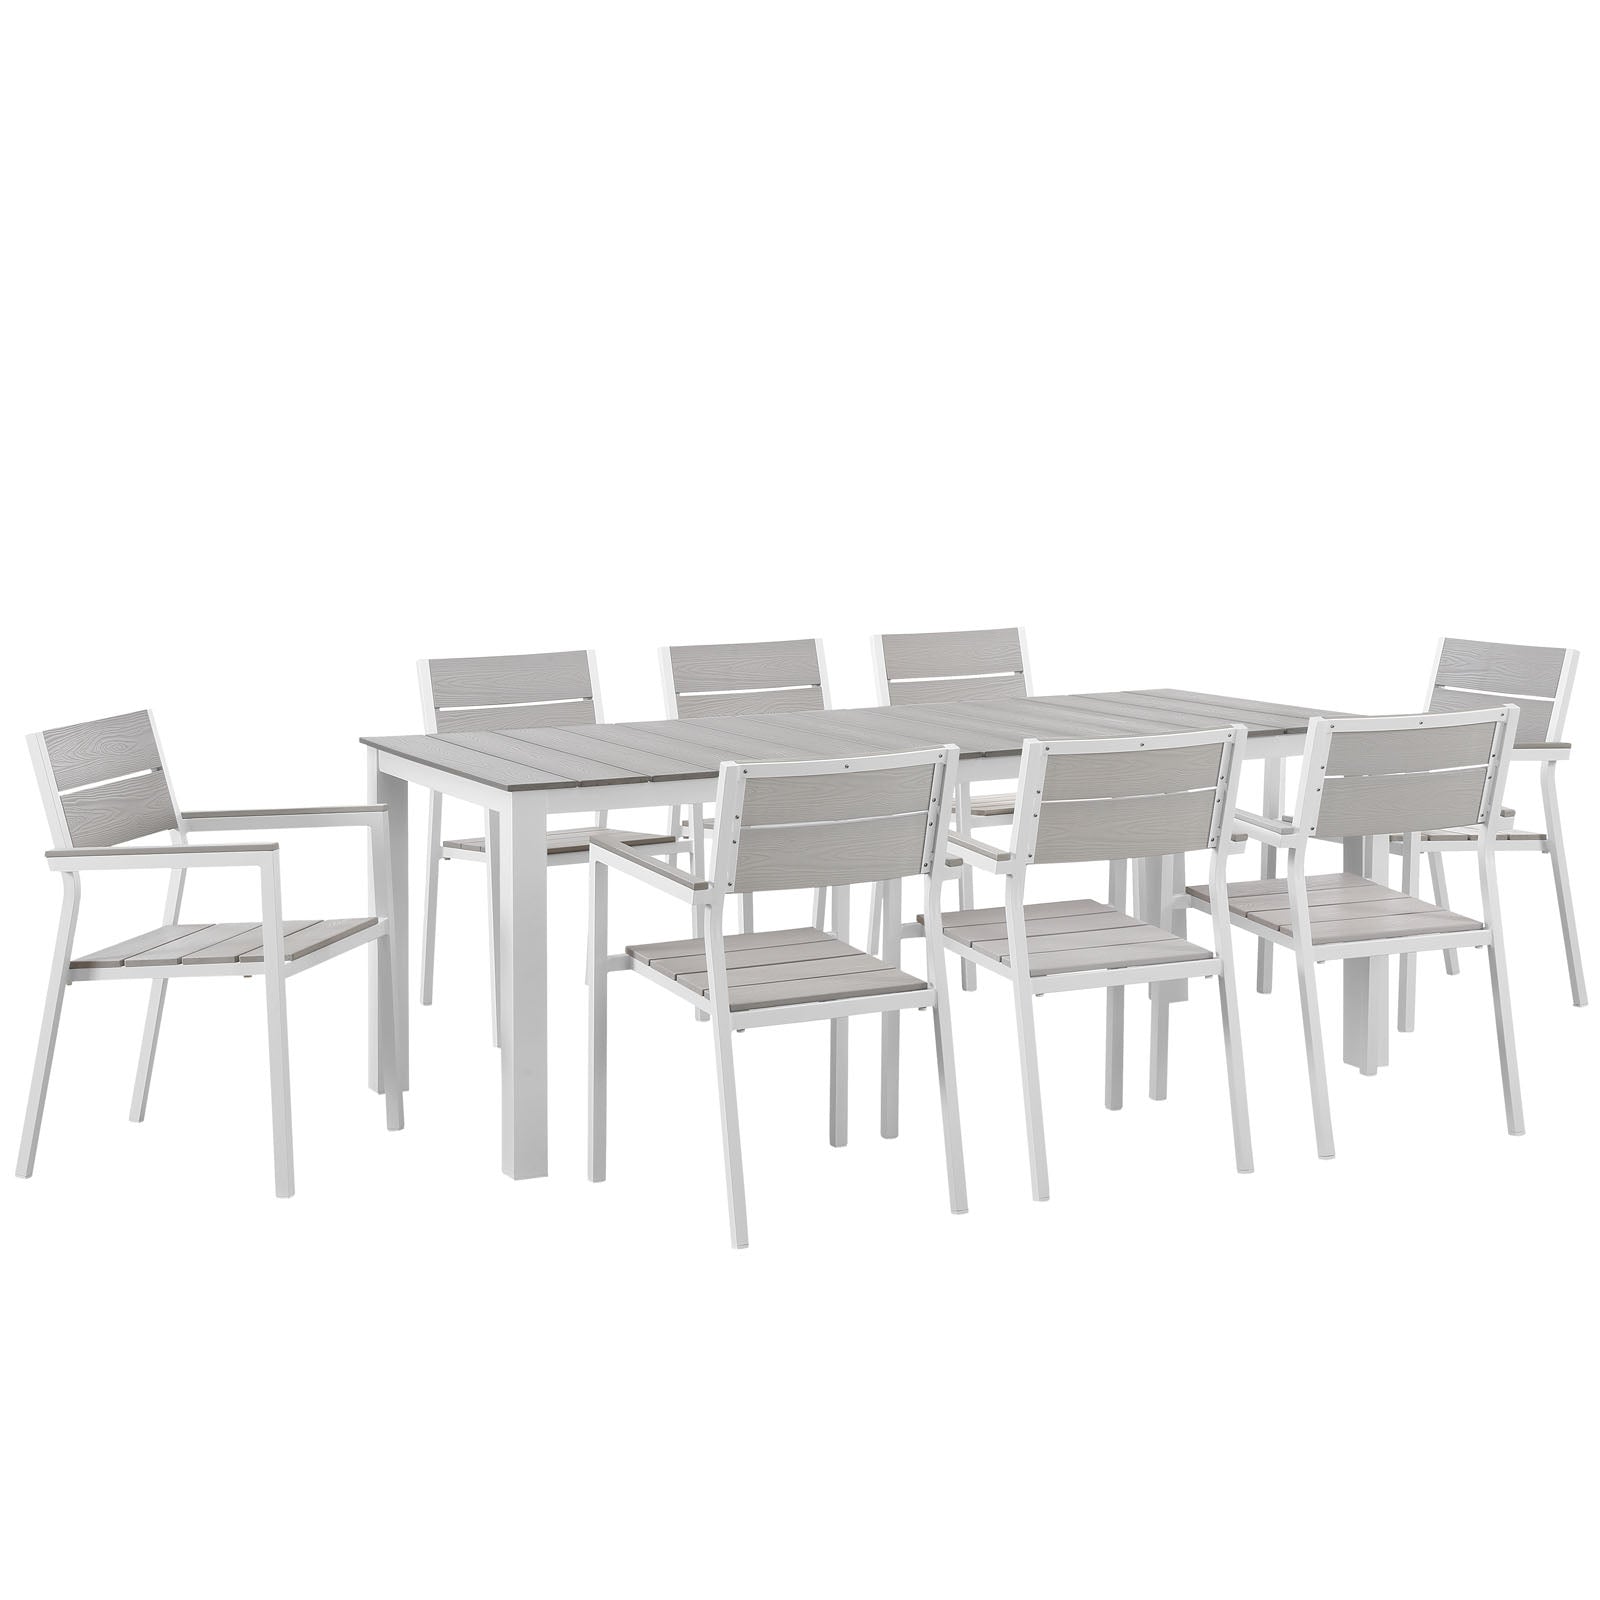 Maine 9 Piece Outdoor Patio Dining Set-Outdoor Dining Set-Modway-Wall2Wall Furnishings